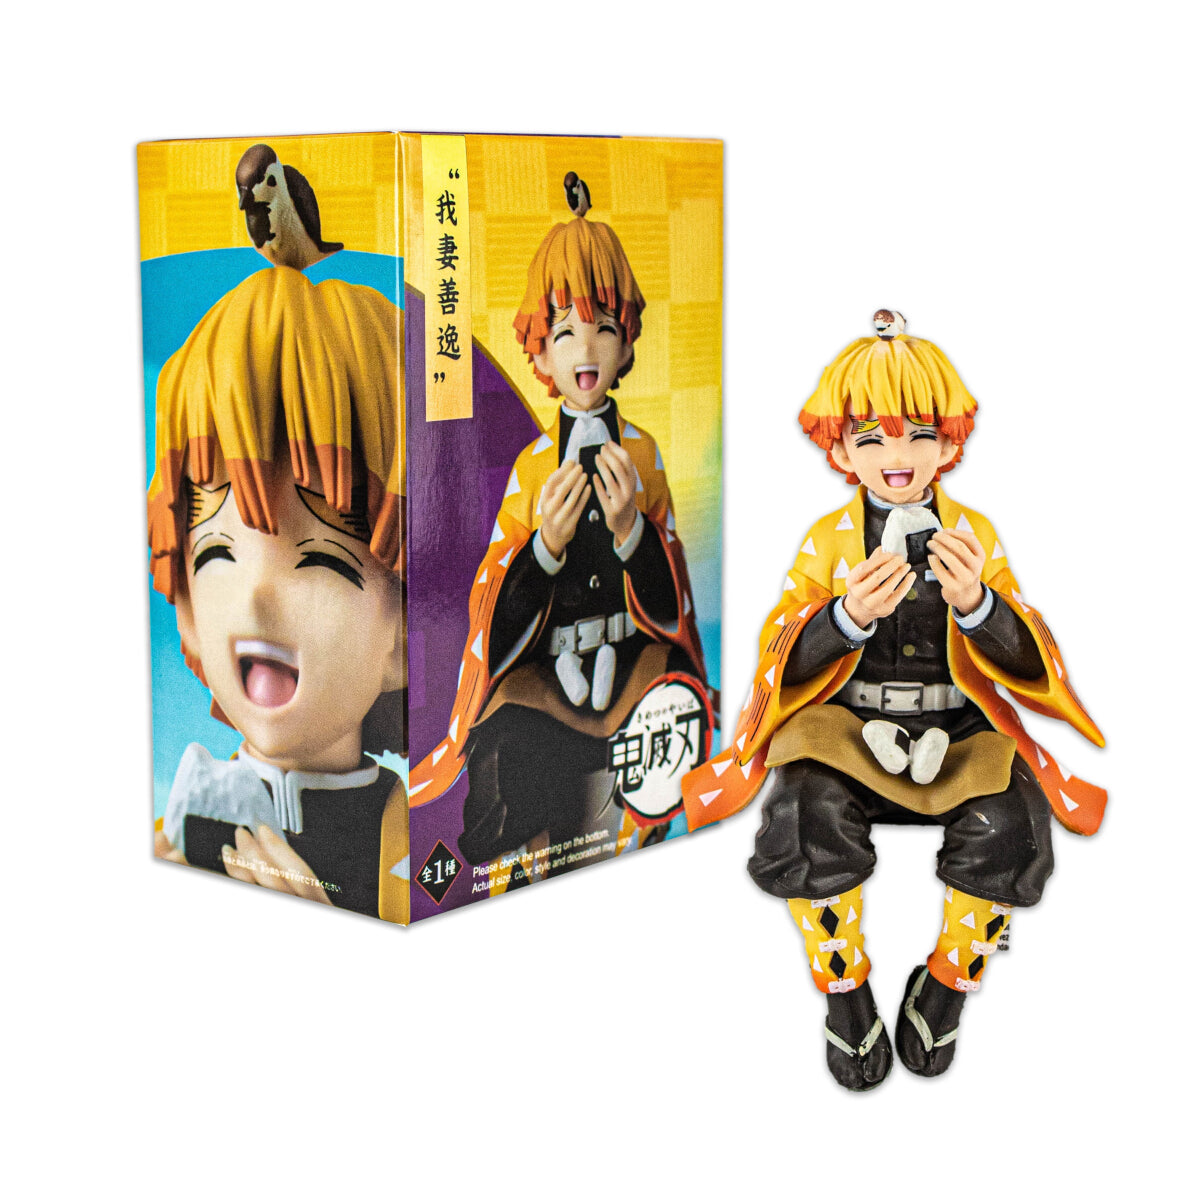 Zenitsu Figure Anime Devil Slayer Eating Rice Balls Sitting Pose Character  Action Figure Ghost Slayer Desk Decor Collection Toy